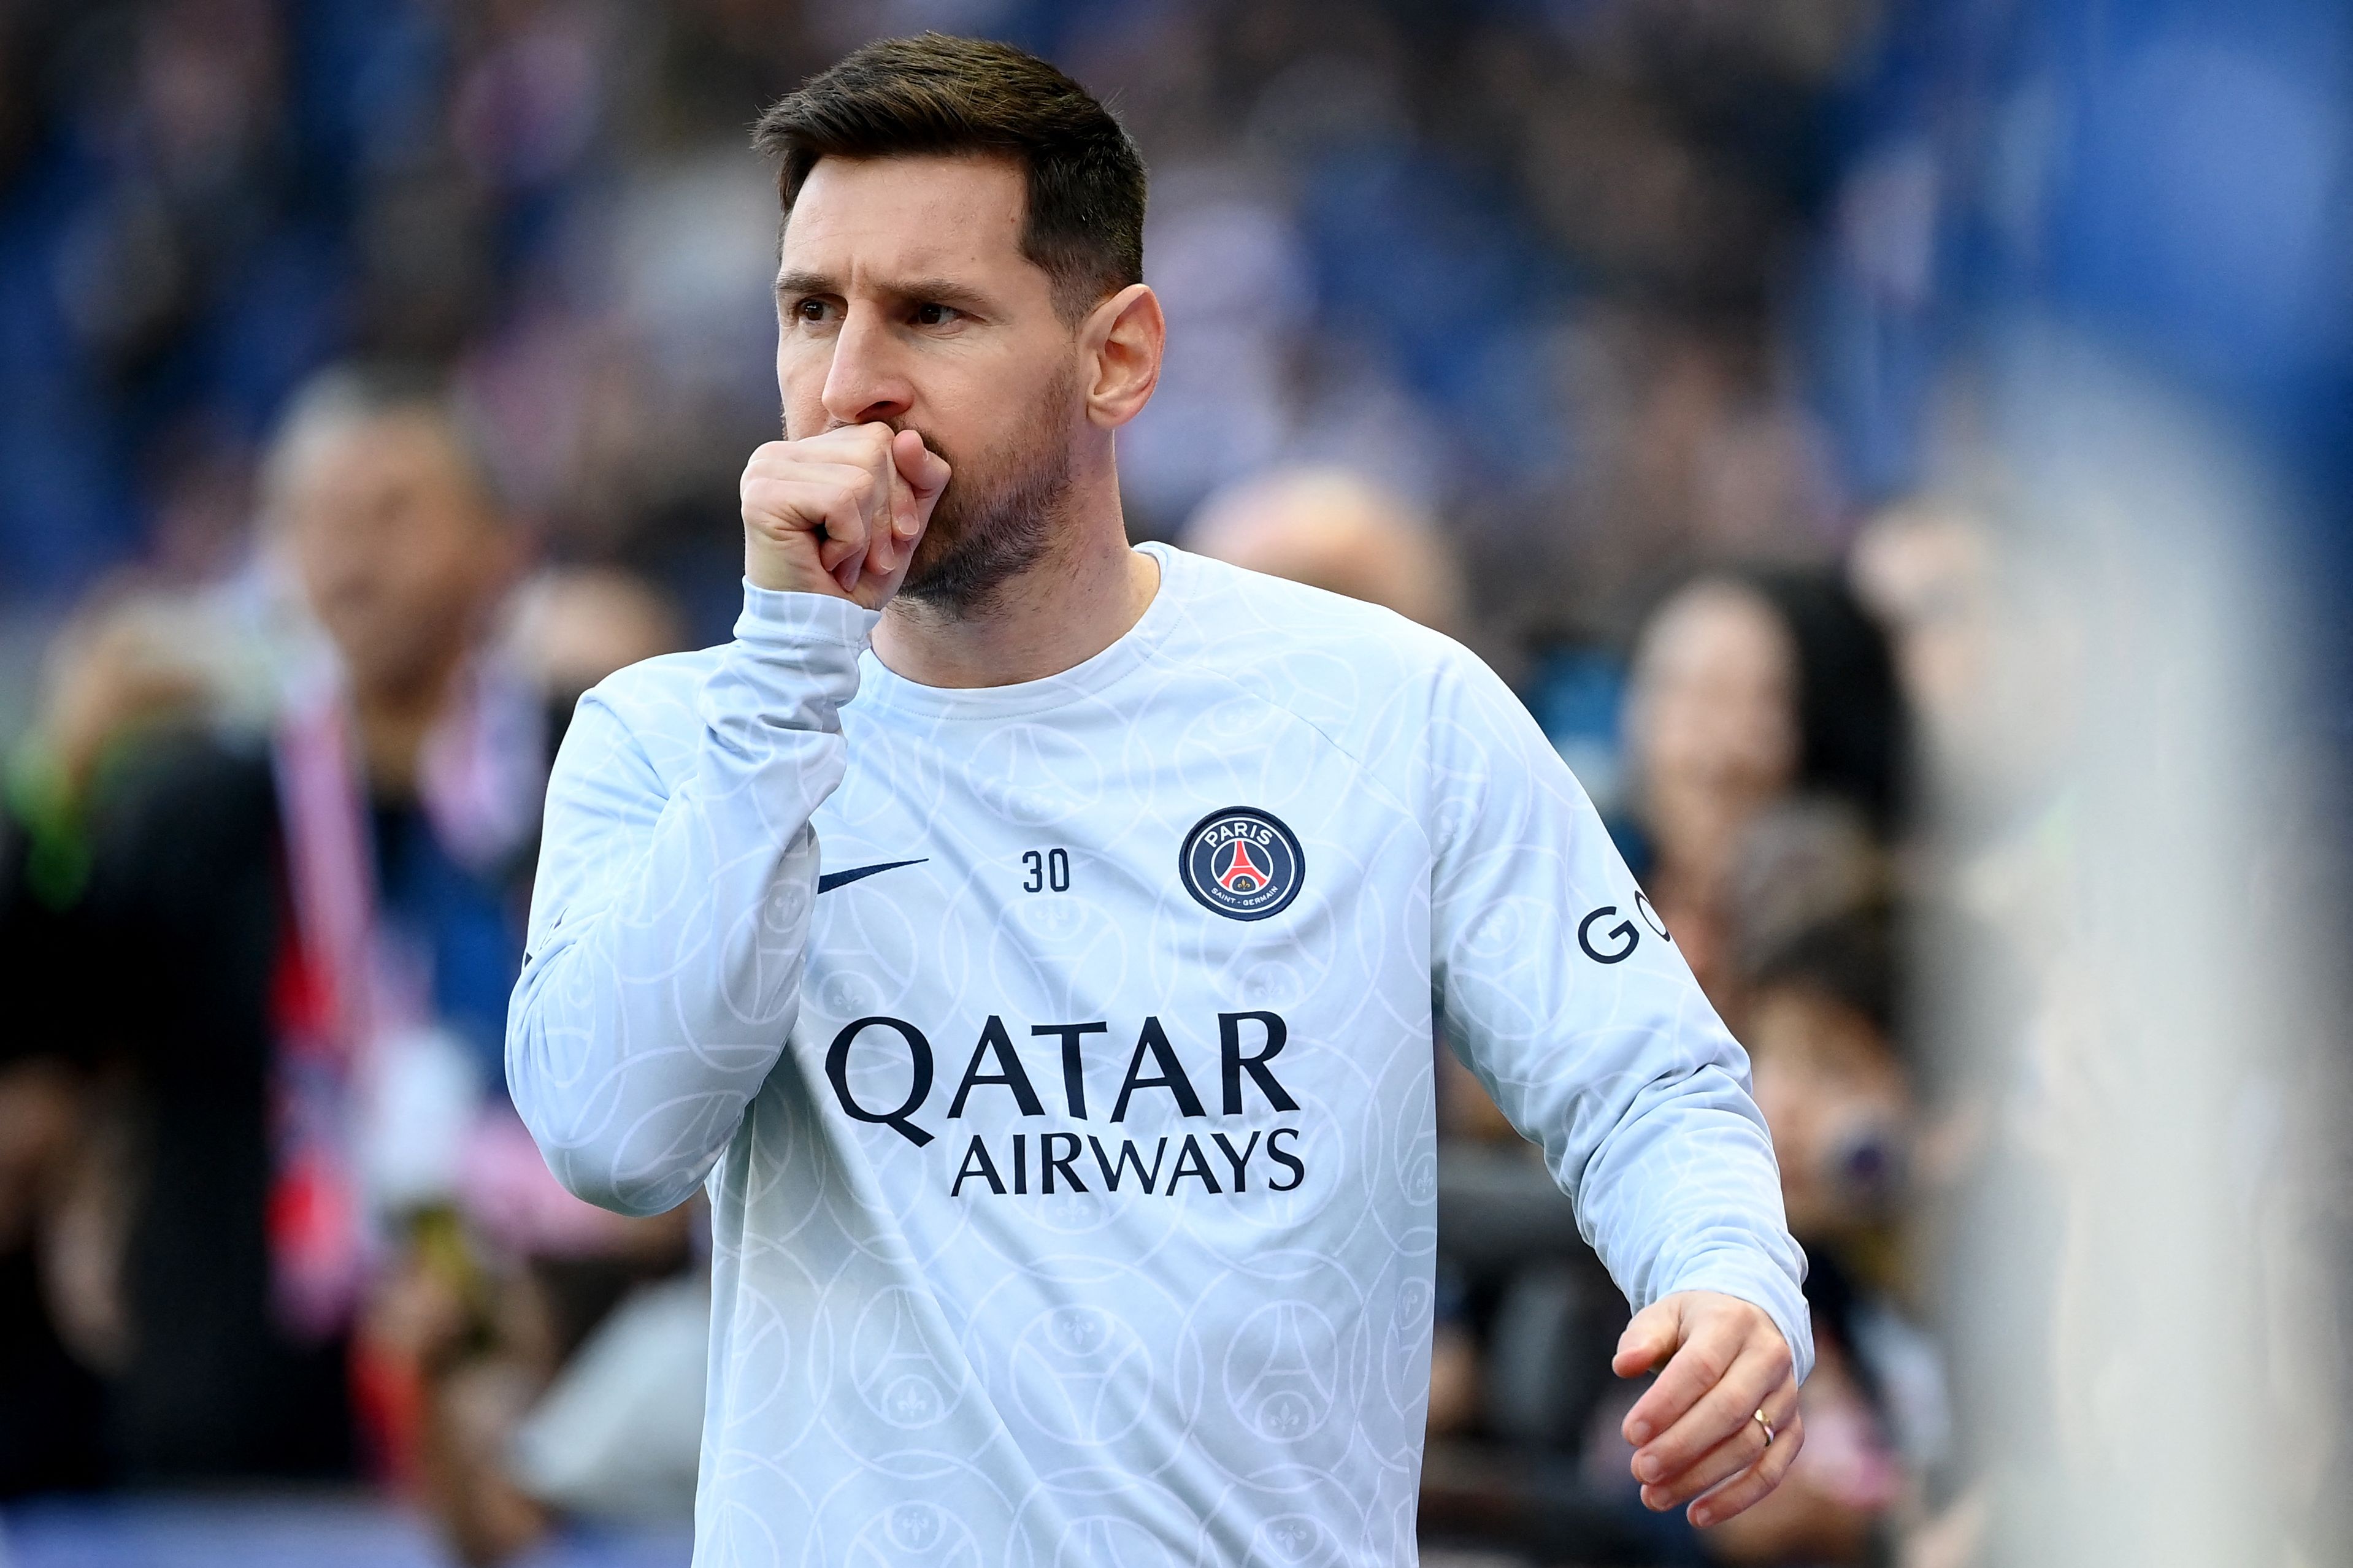 Messi is going to renew his contract with PSG, according to Le Parisien